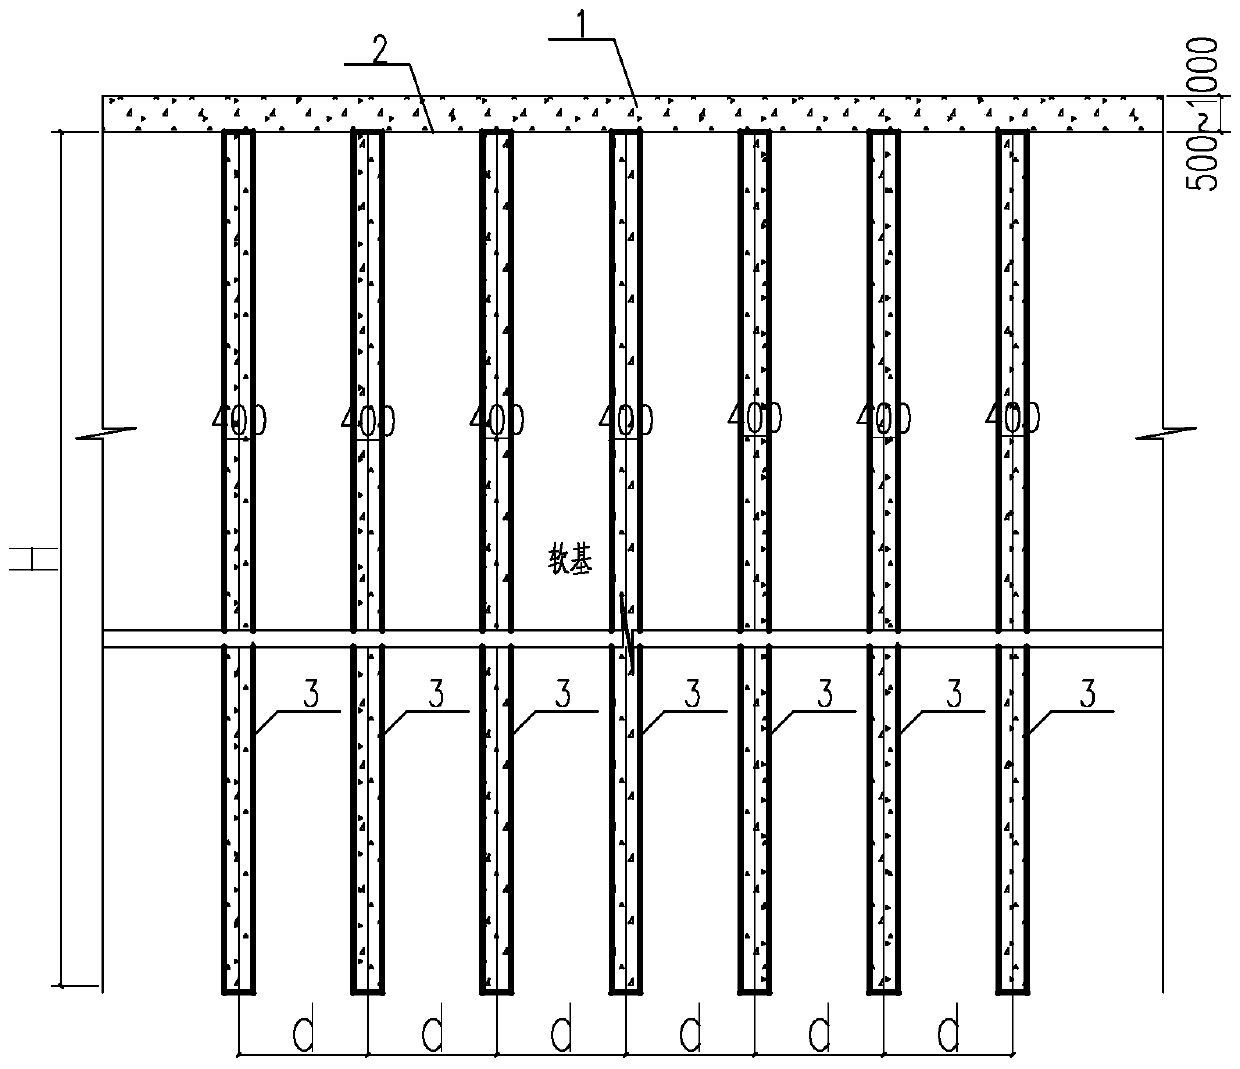 Reinforcing and surcharge structure used for preventing deep soft foundation dump against floor heave and instability